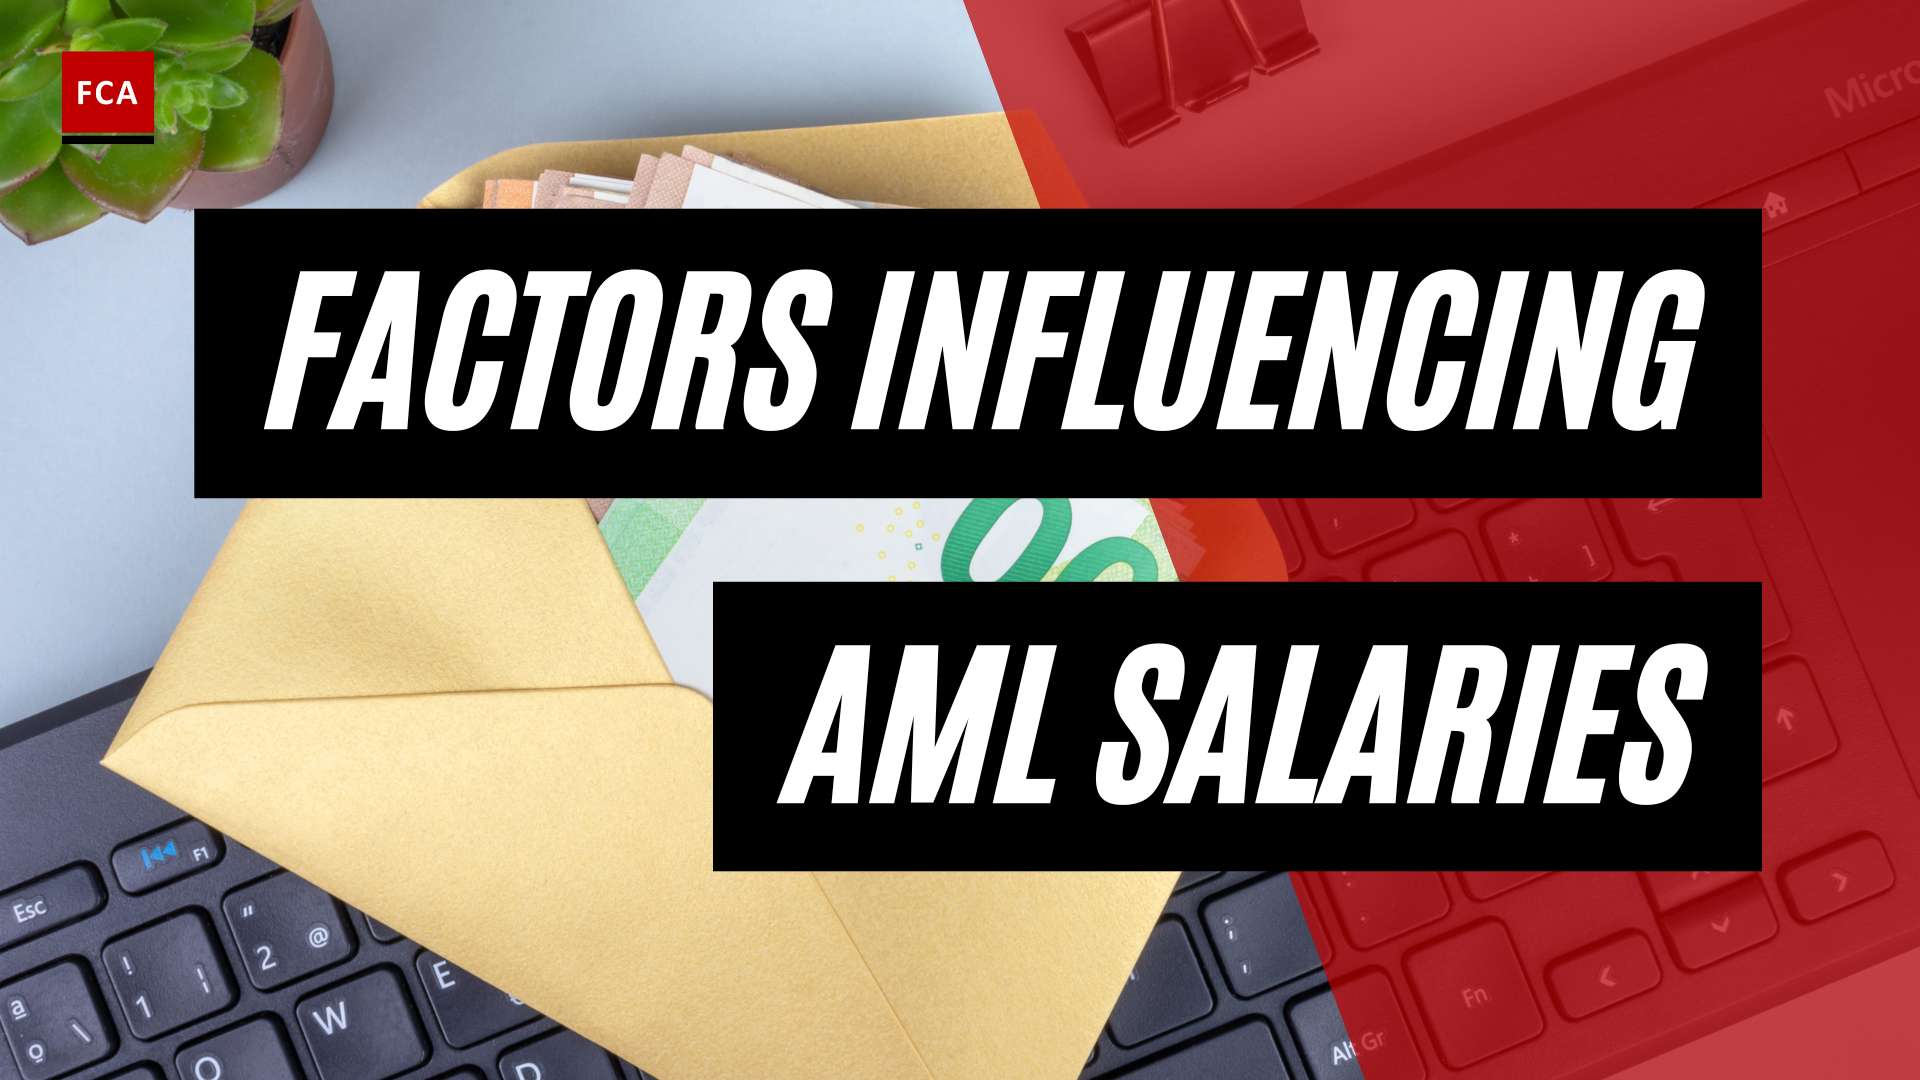 From Entry-Level To Executive: Aml Salary Guide For Career Advancement